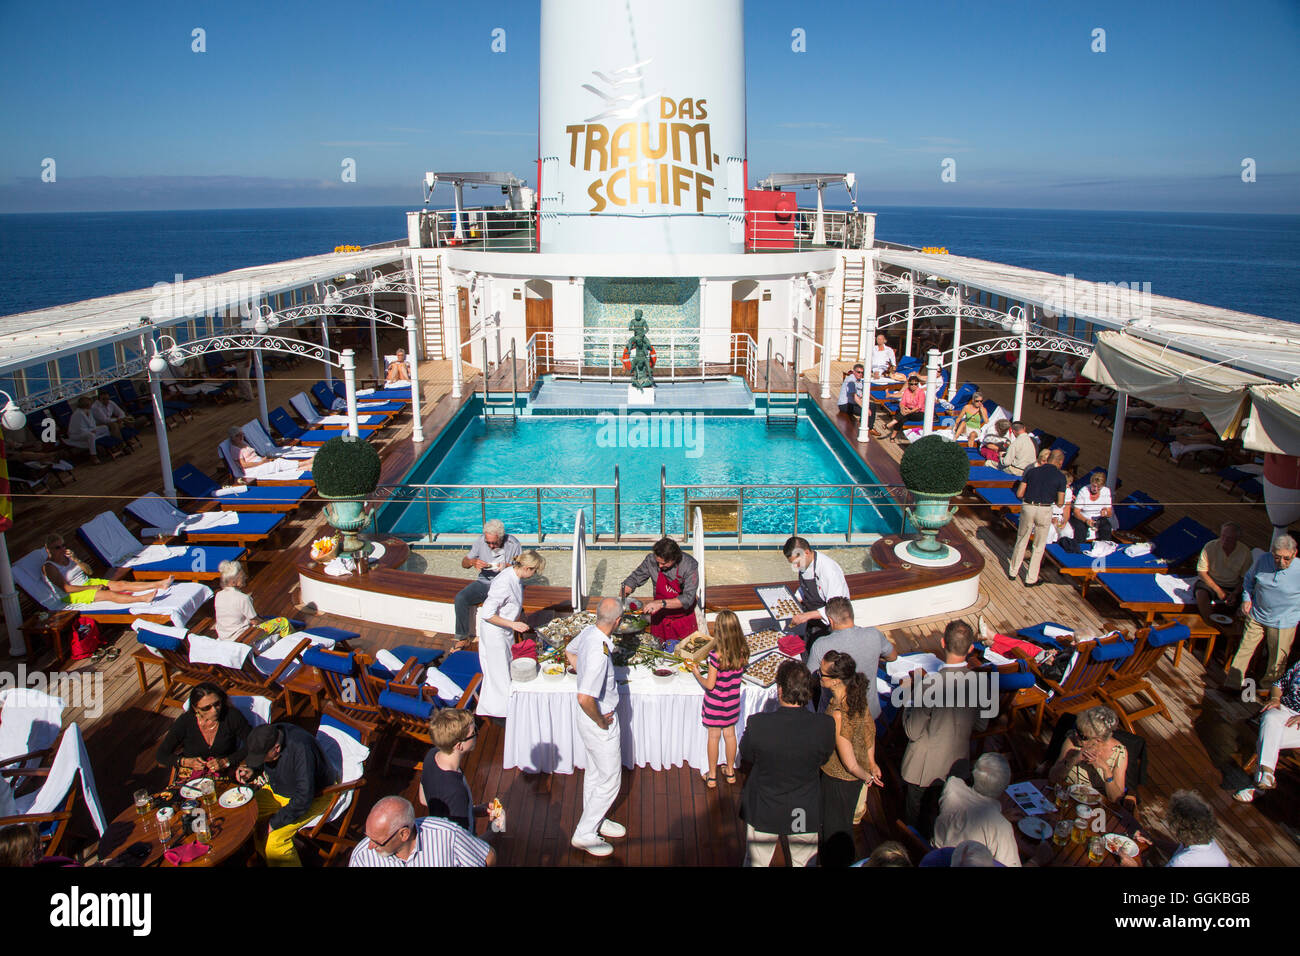 Oysters being served during a celebration on the pool deck of cruise ship MS Deutschland (Reederei Peter Deilmann), Atlantic Oce Stock Photo